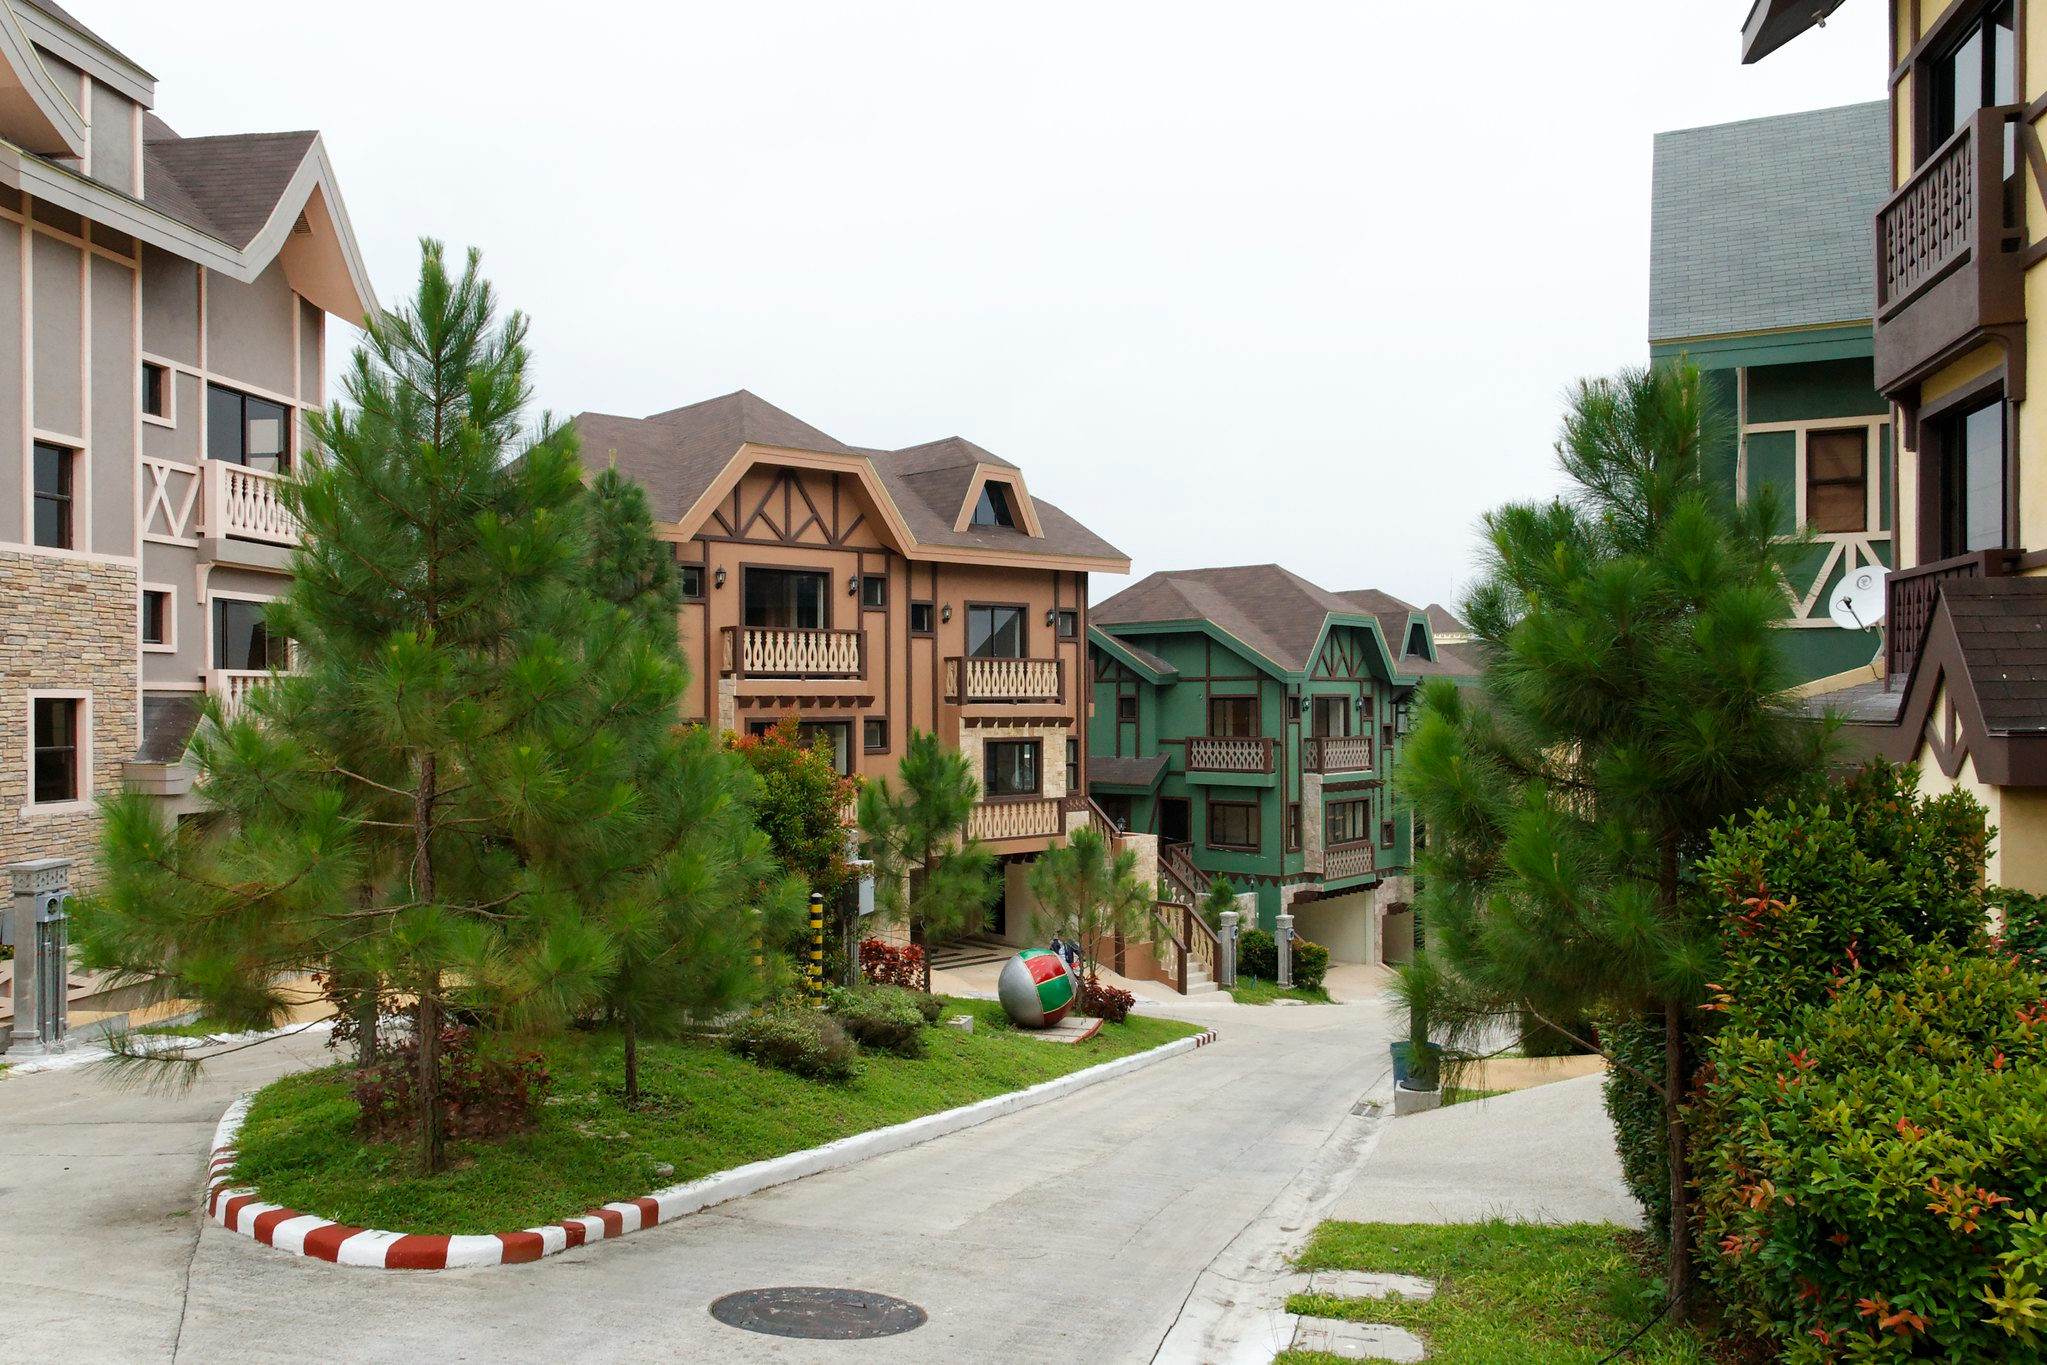 Image of the Deux Pointe inside the world-class community of Crosswinds Tagaytay